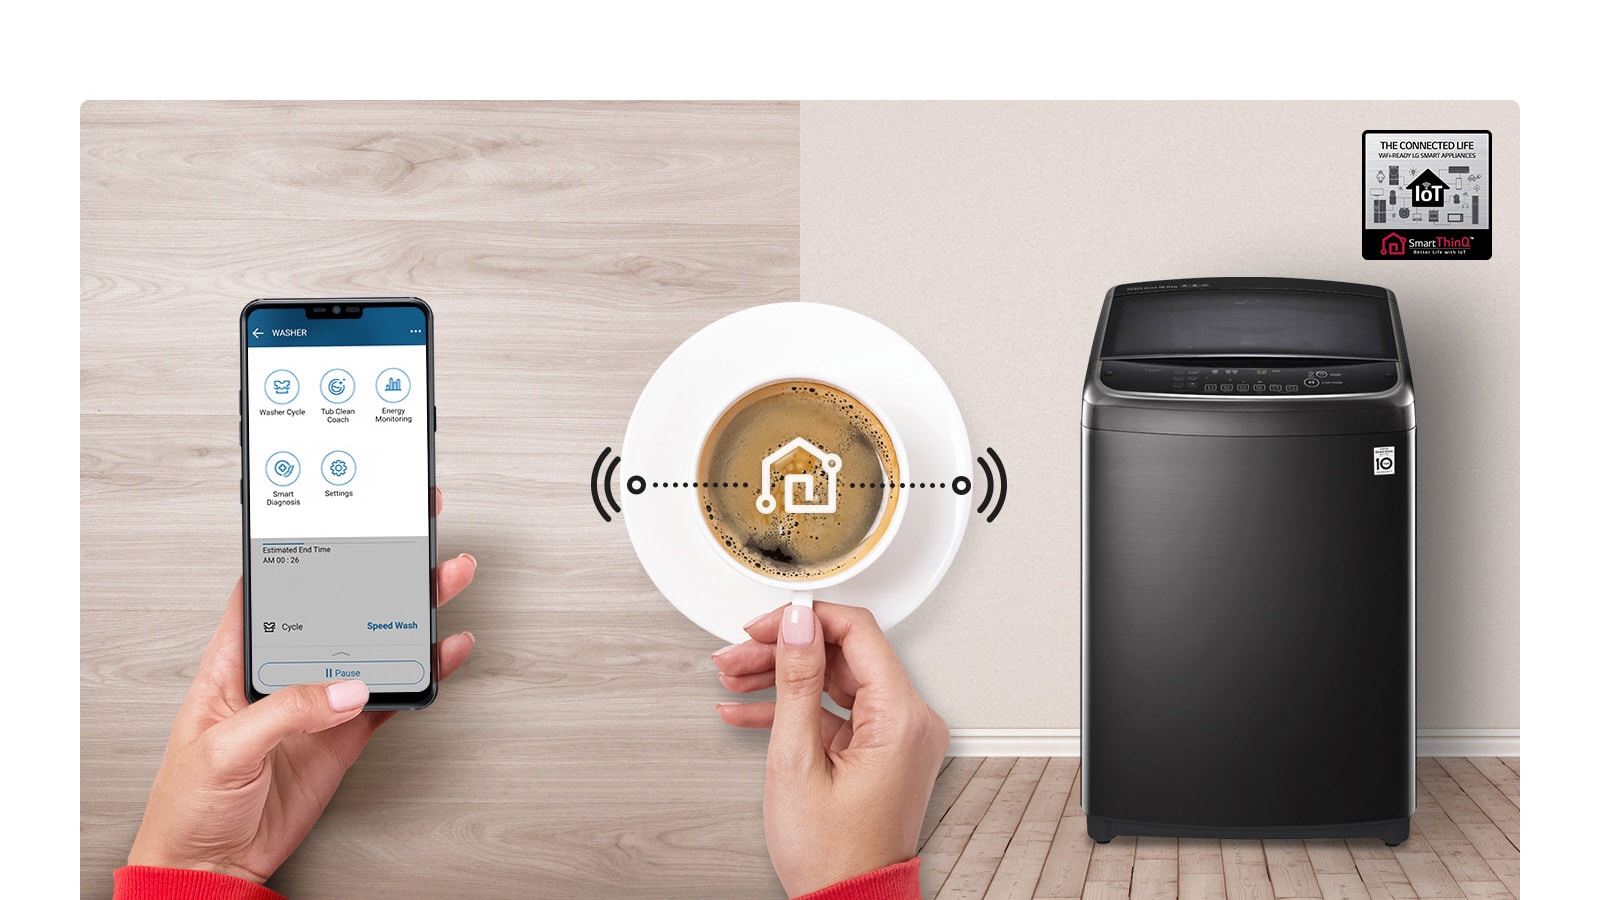 Smart Laundry with Wi-Fi3